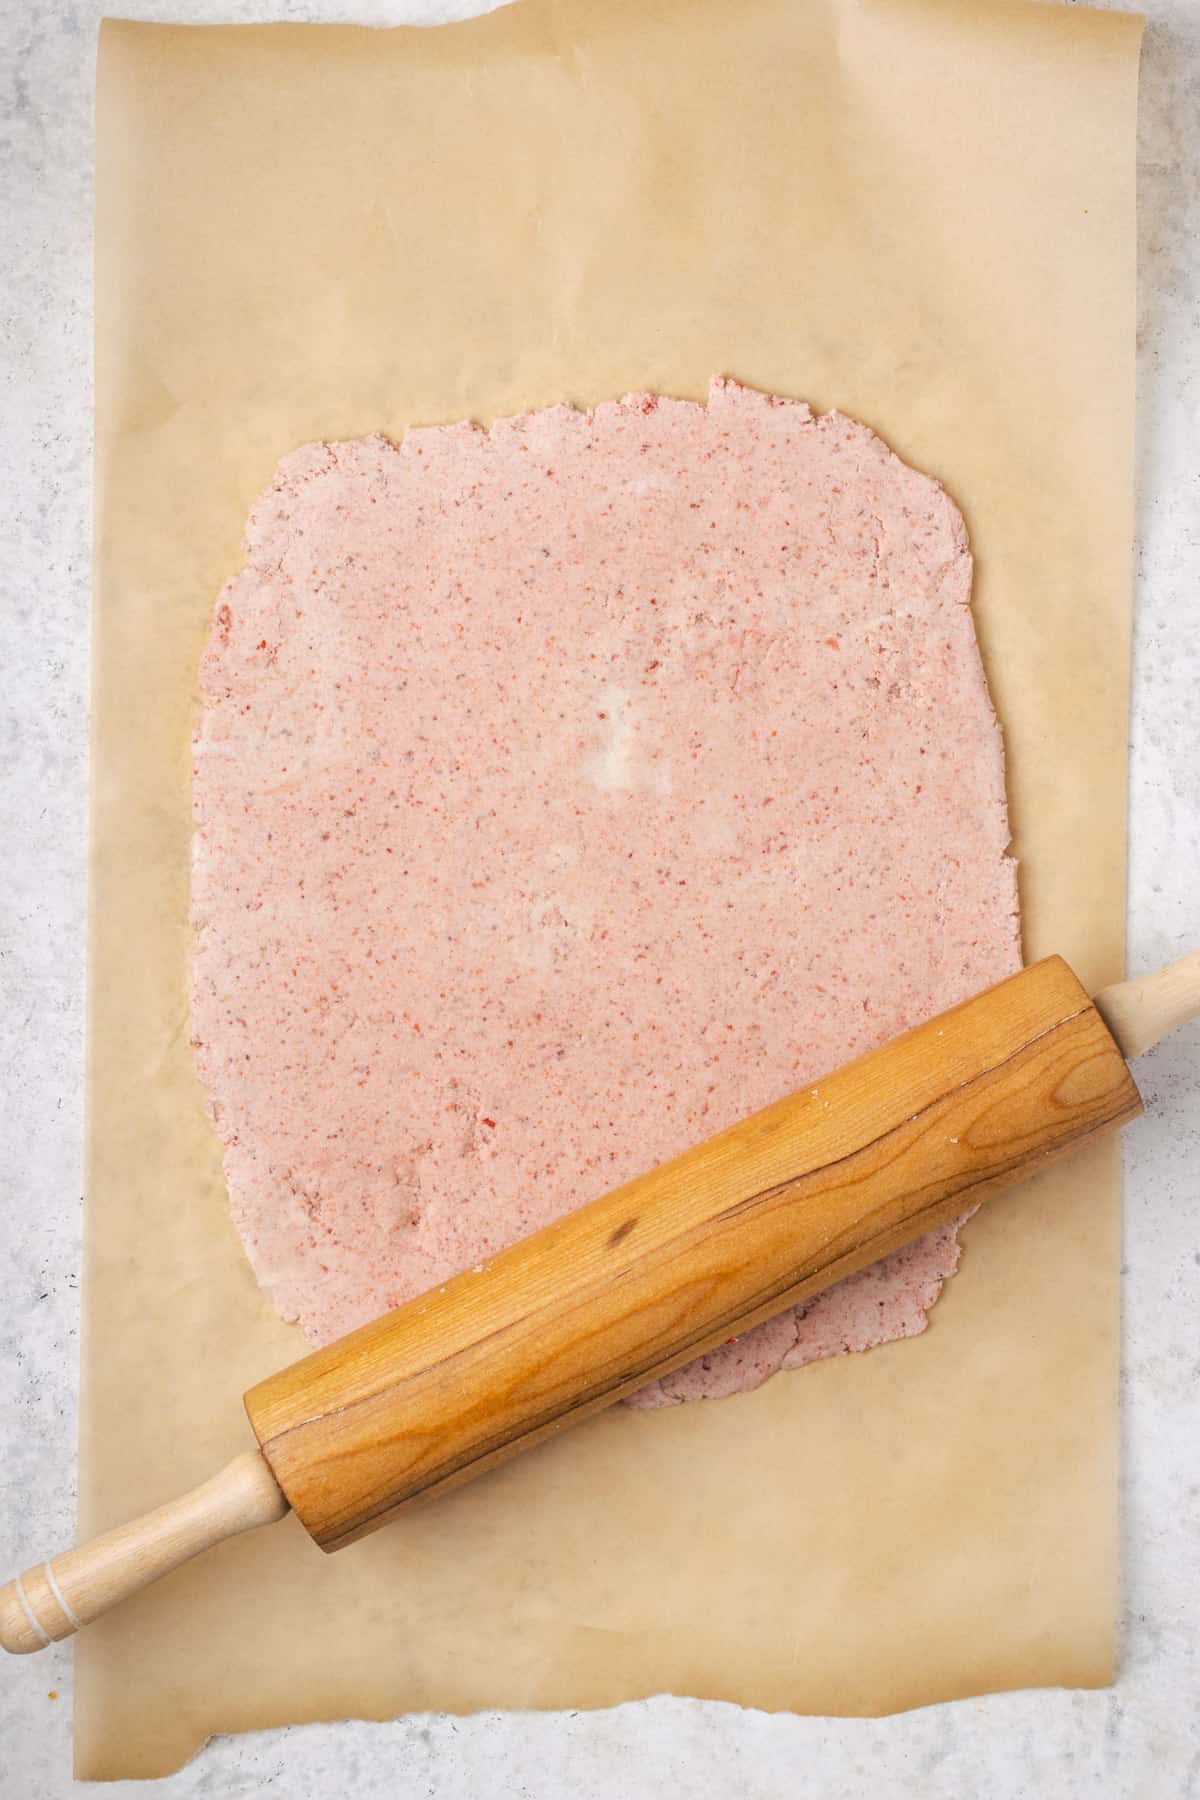 Strawberry cheesecake cookie dough being rolled into a large rectangle with a wooden rolling pin.